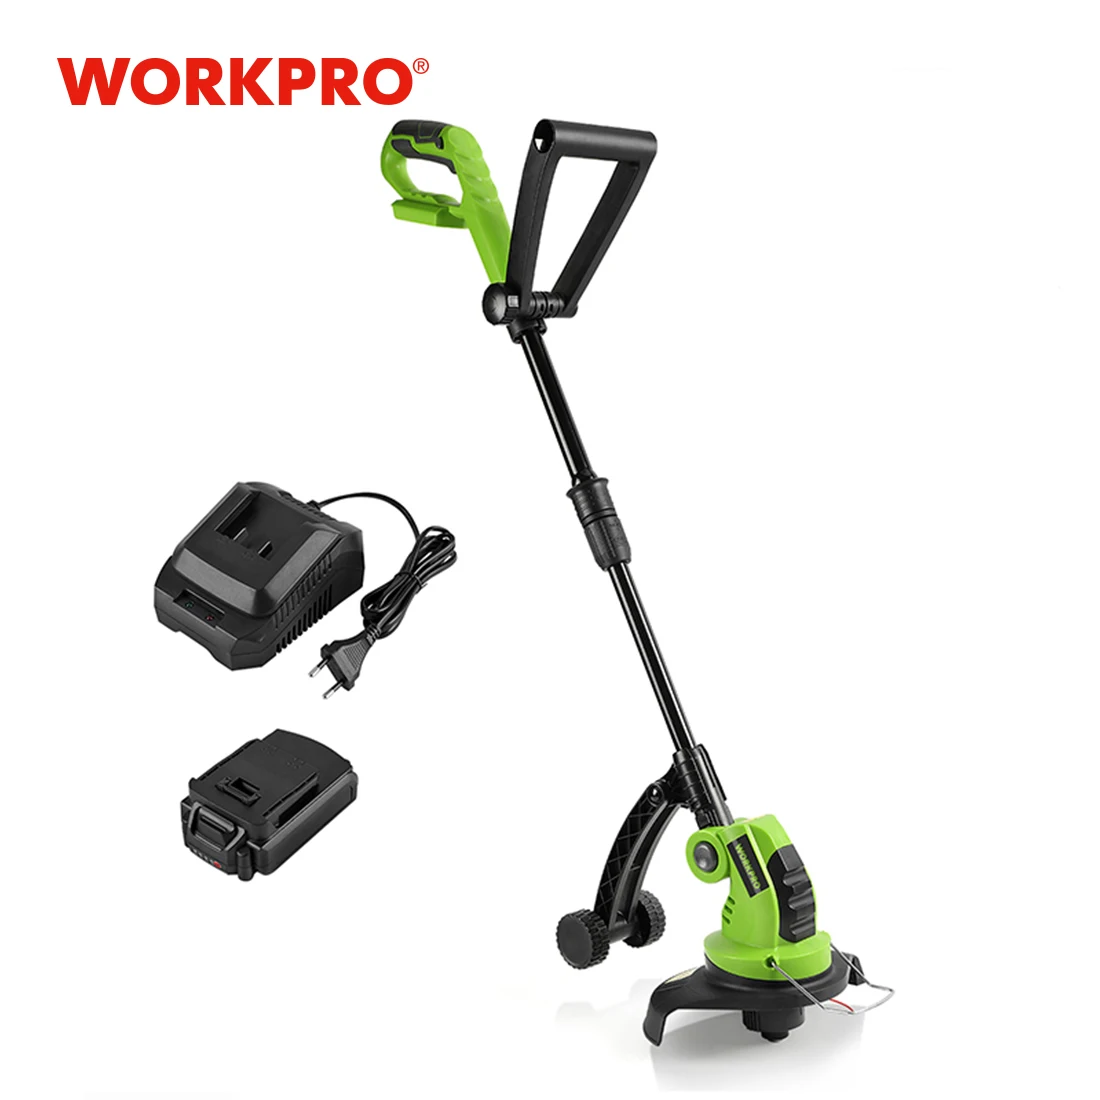 WORKPRO Cordless Grass Trimmer 18V 2000mAh Electric Trimmer Power Garden Tools 23cm Cutting Diameter Battery & Charger Included